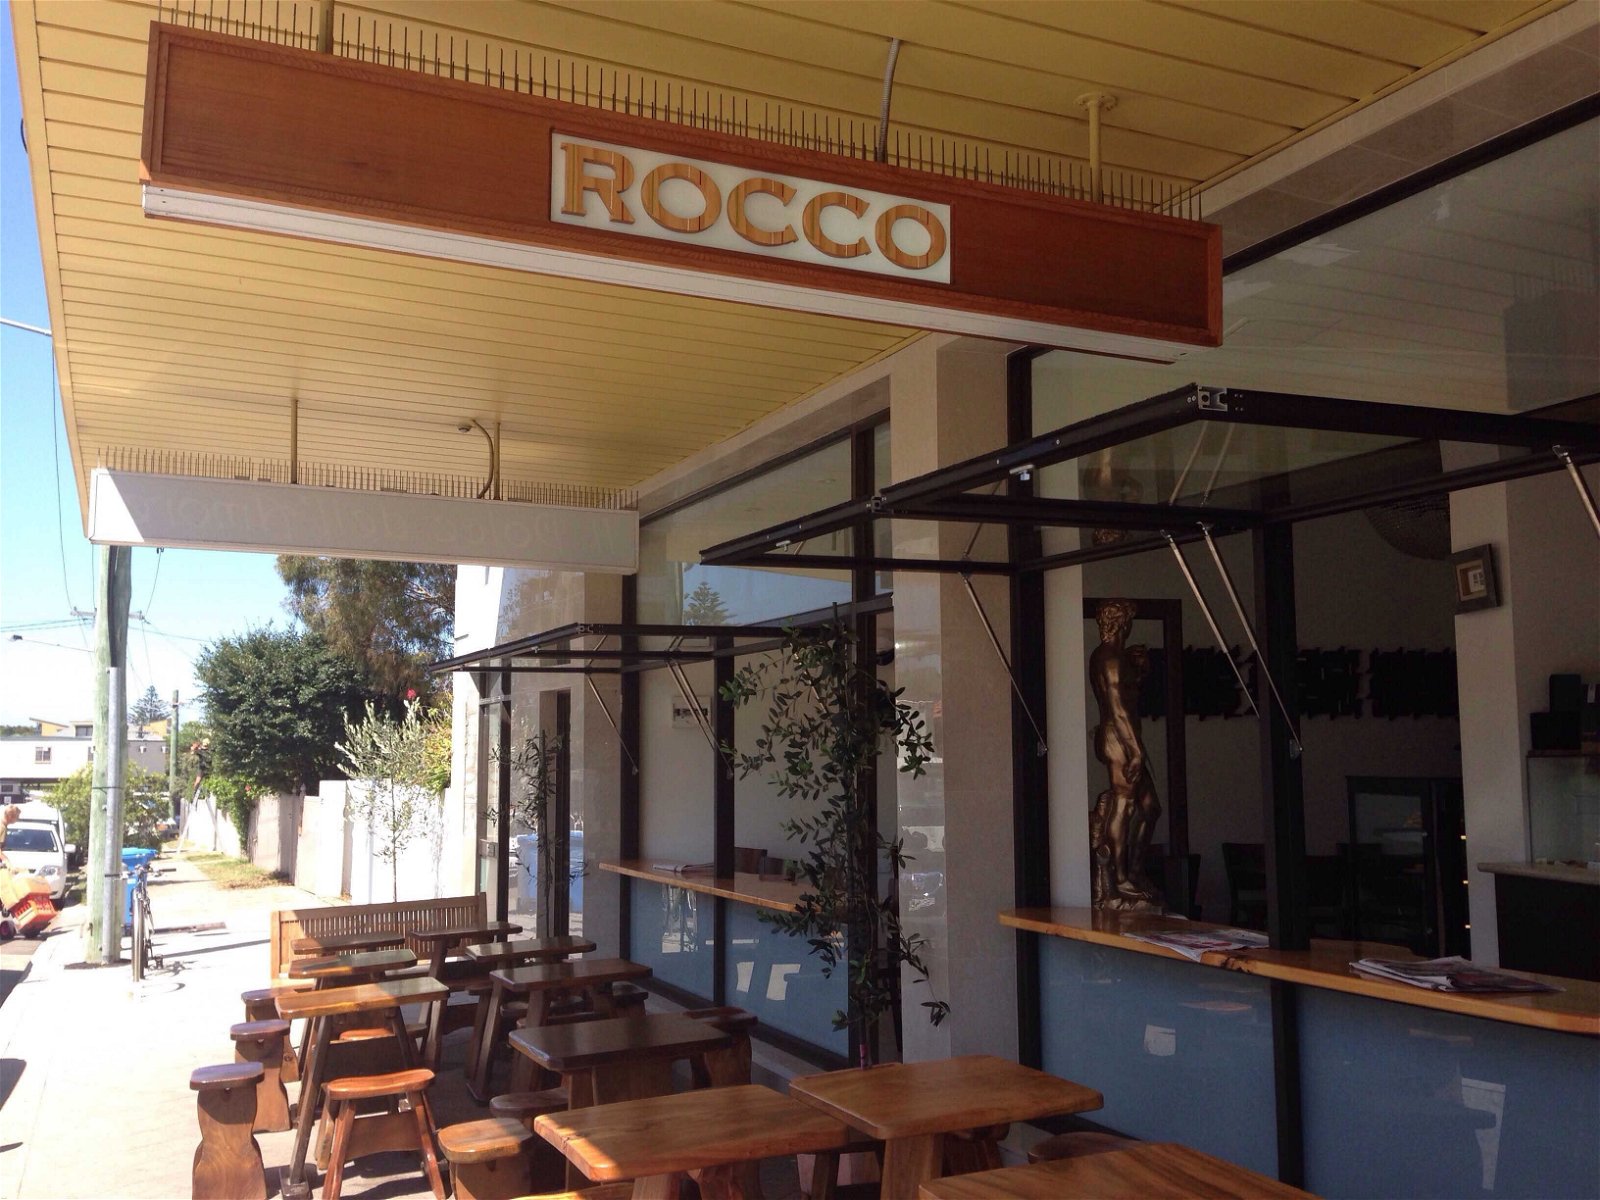 Rocco - Accommodation Find 0